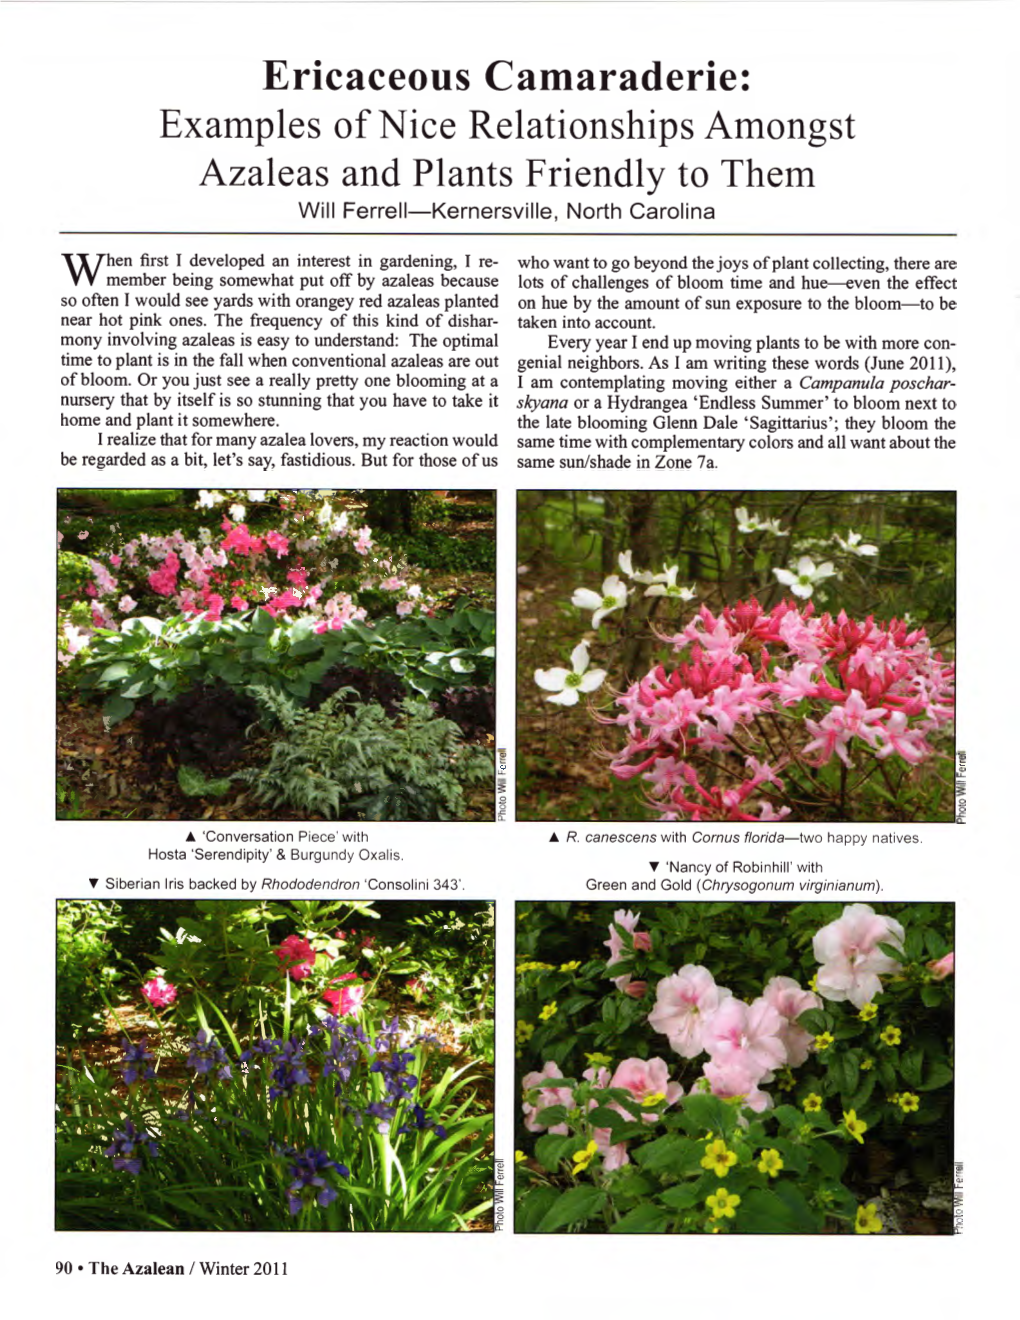 Ericaceous Camaraderie: Examples of Nice Relationships Amongst Azaleas and Plants Friendly to Them